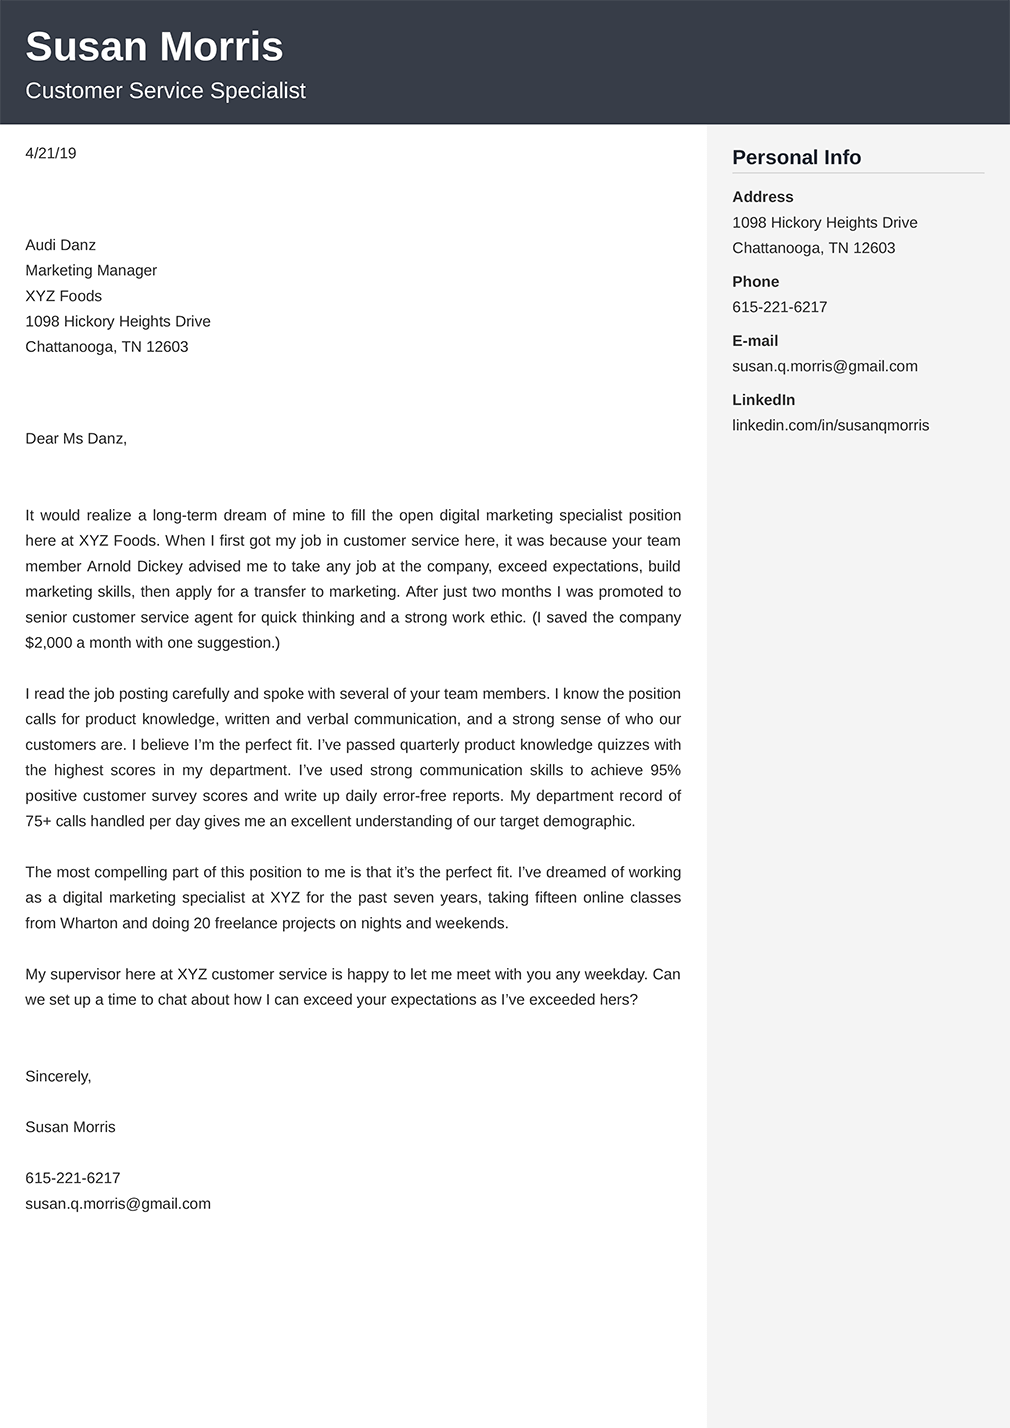 Free Customer Service Cover Letter from cdn-images.zety.com